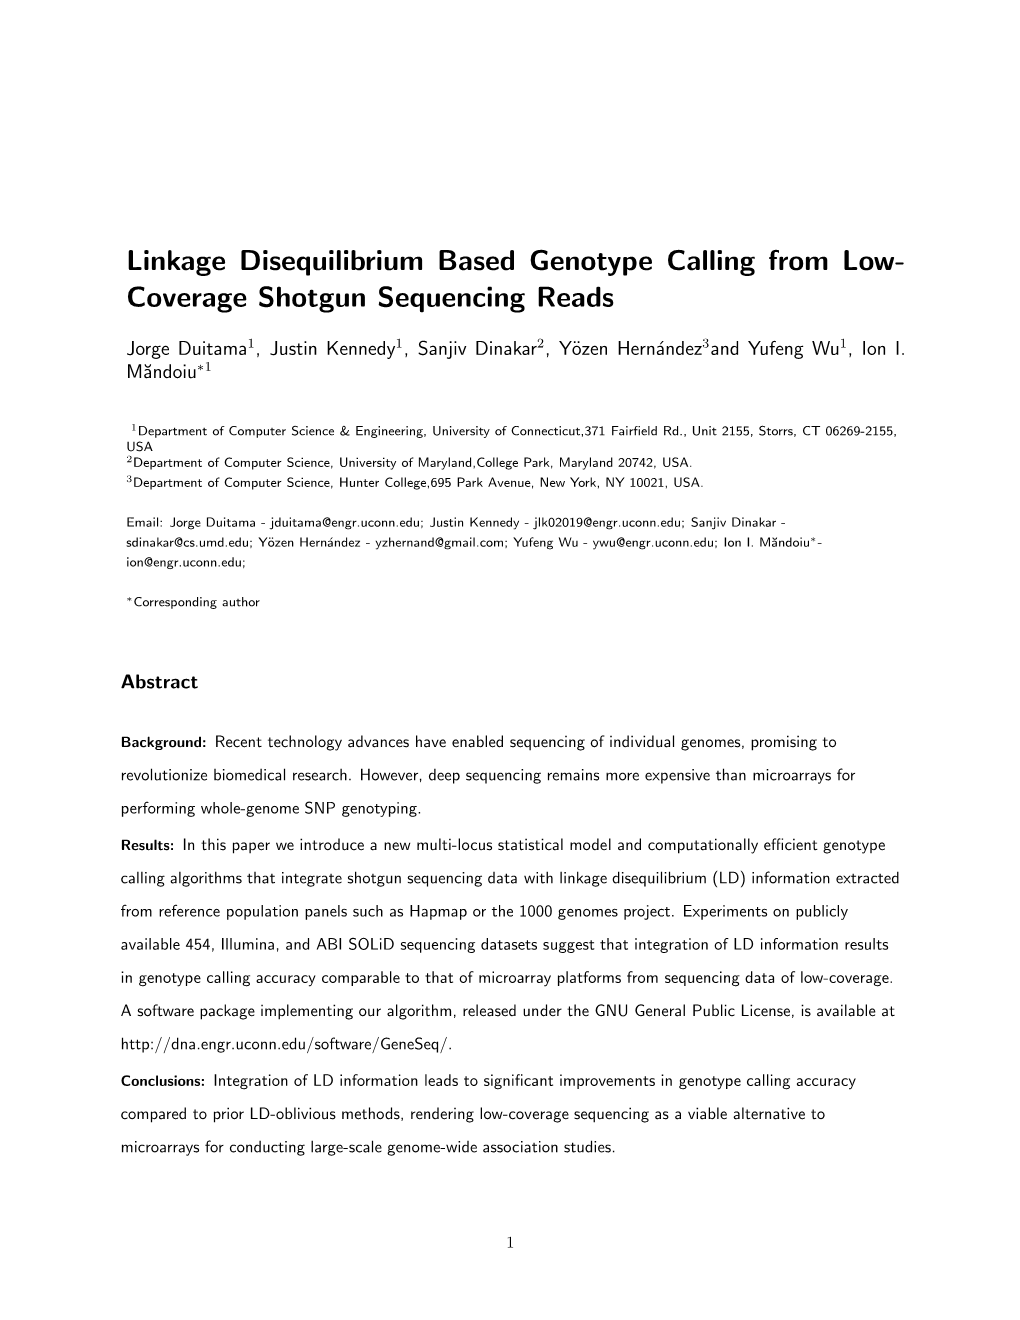 Linkage Disequilibrium Based Genotype Calling from Low- Coverage Shotgun Sequencing Reads